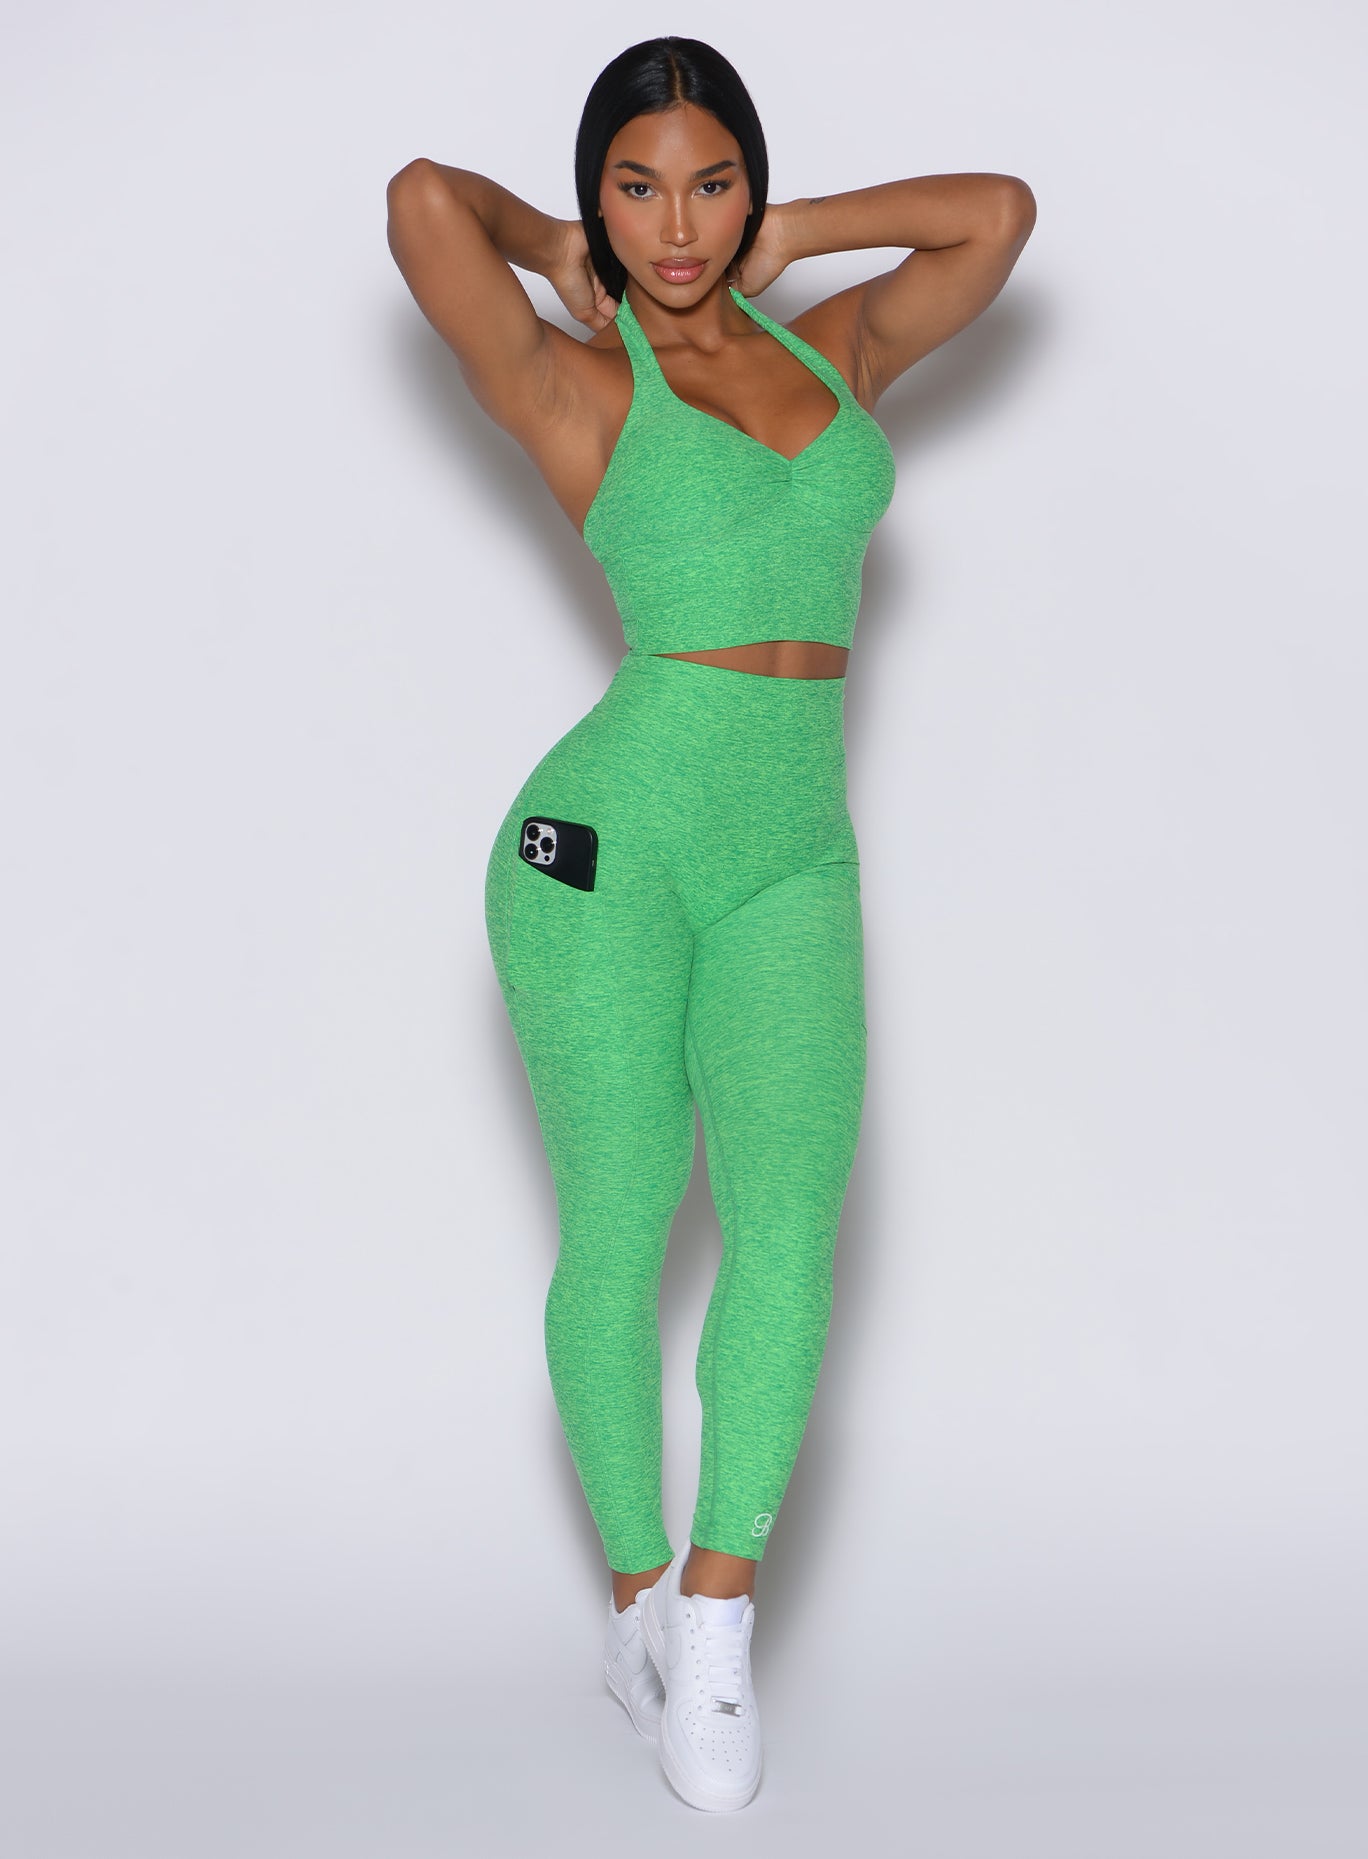 front profile picture of a model wearing our V back leggings in Neon Miami Beach color along with a matching bra